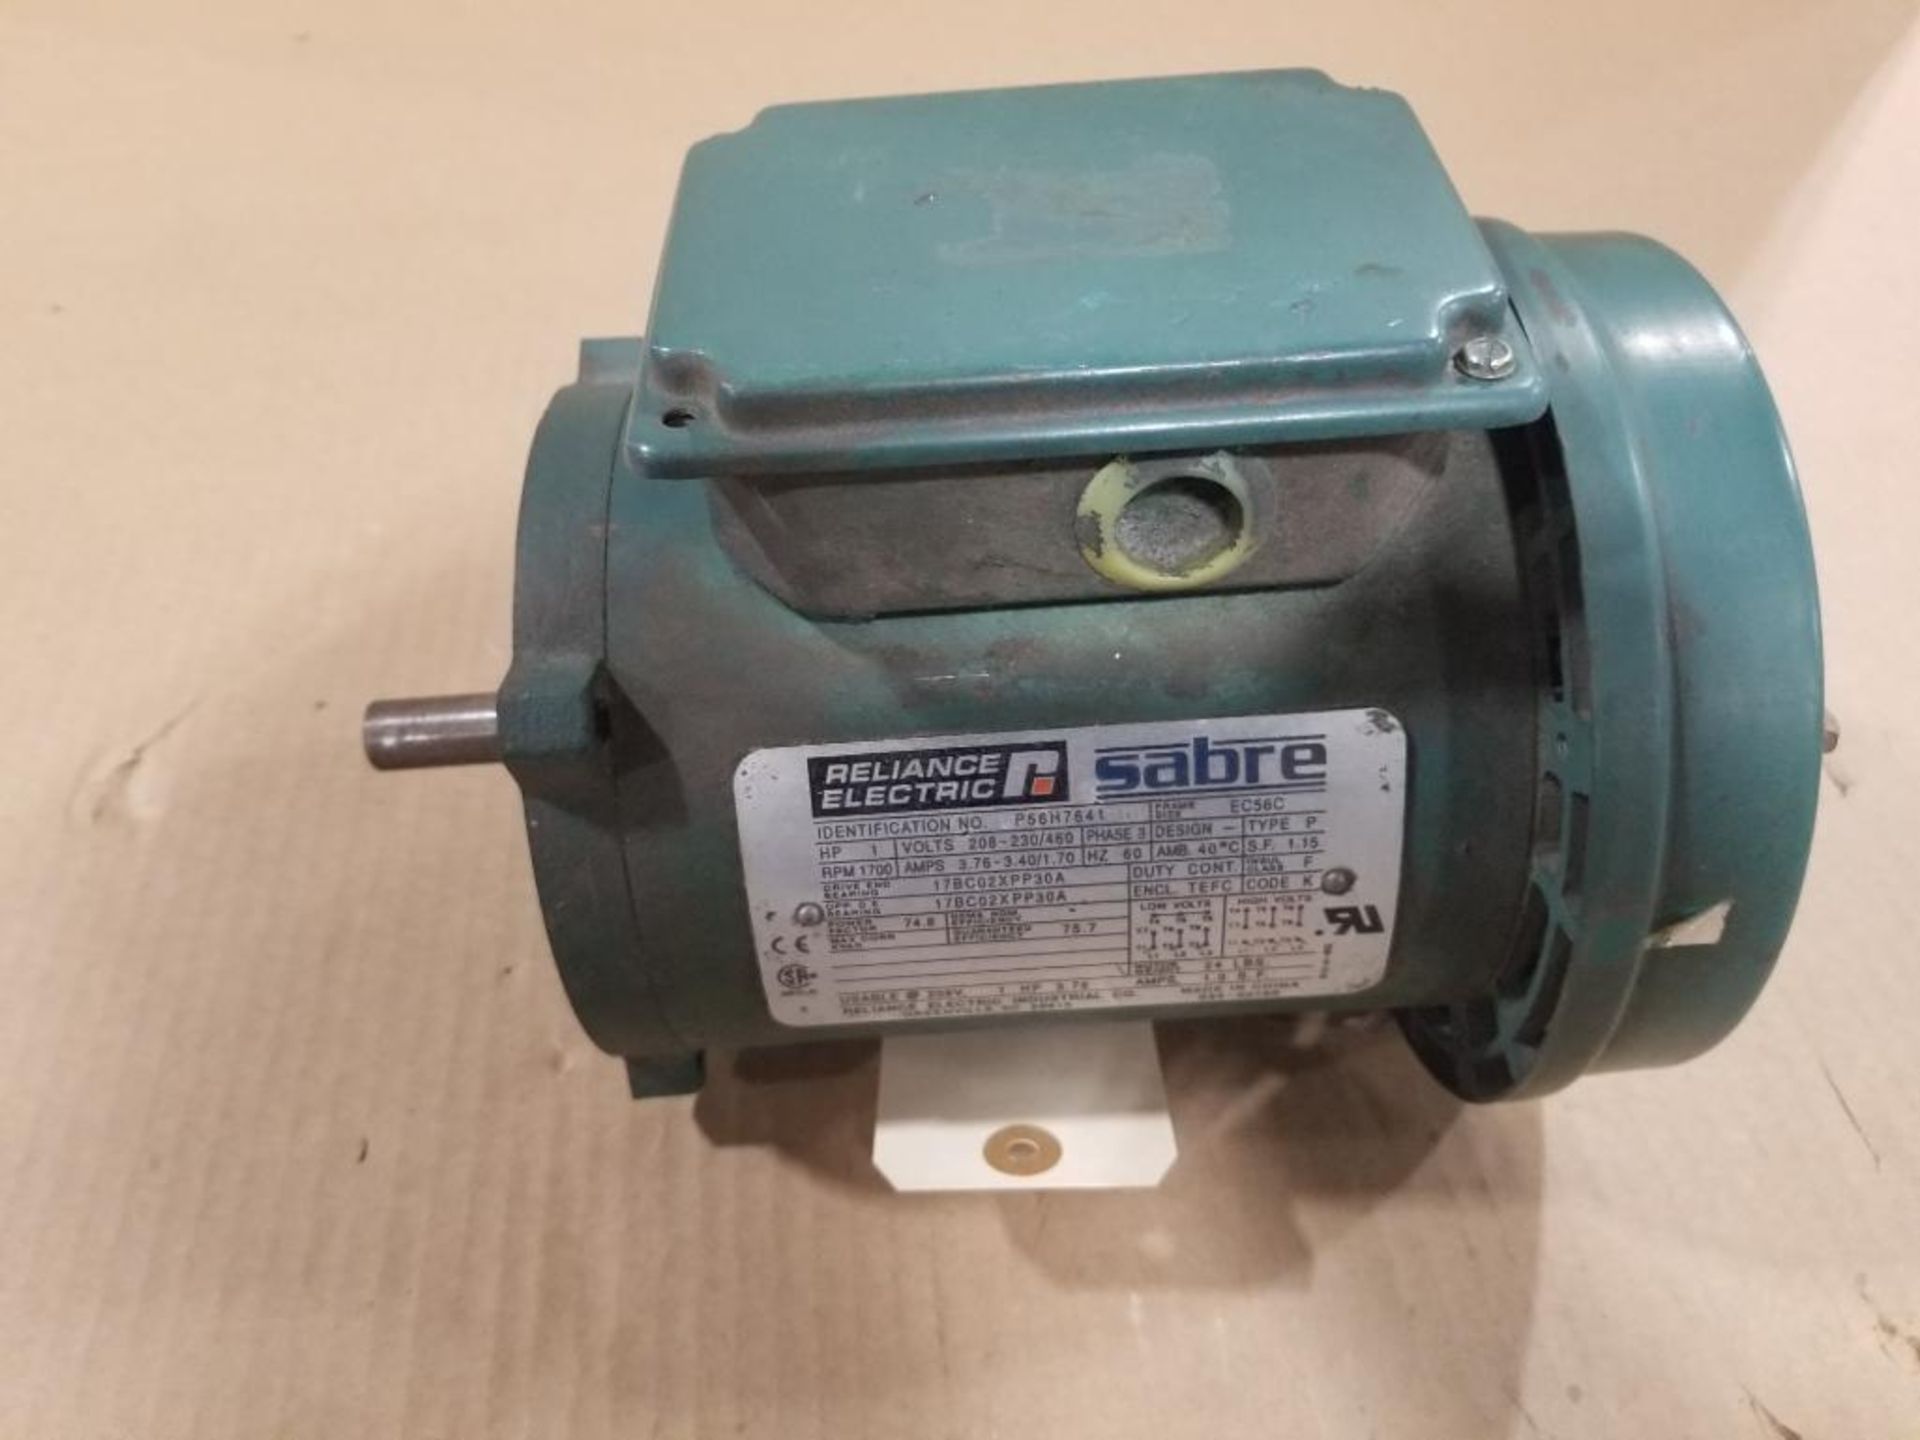 1hp Reliance Electric motors. 208-230/460v 3 phase. 1700rpm, EC56C frame. - Image 3 of 5